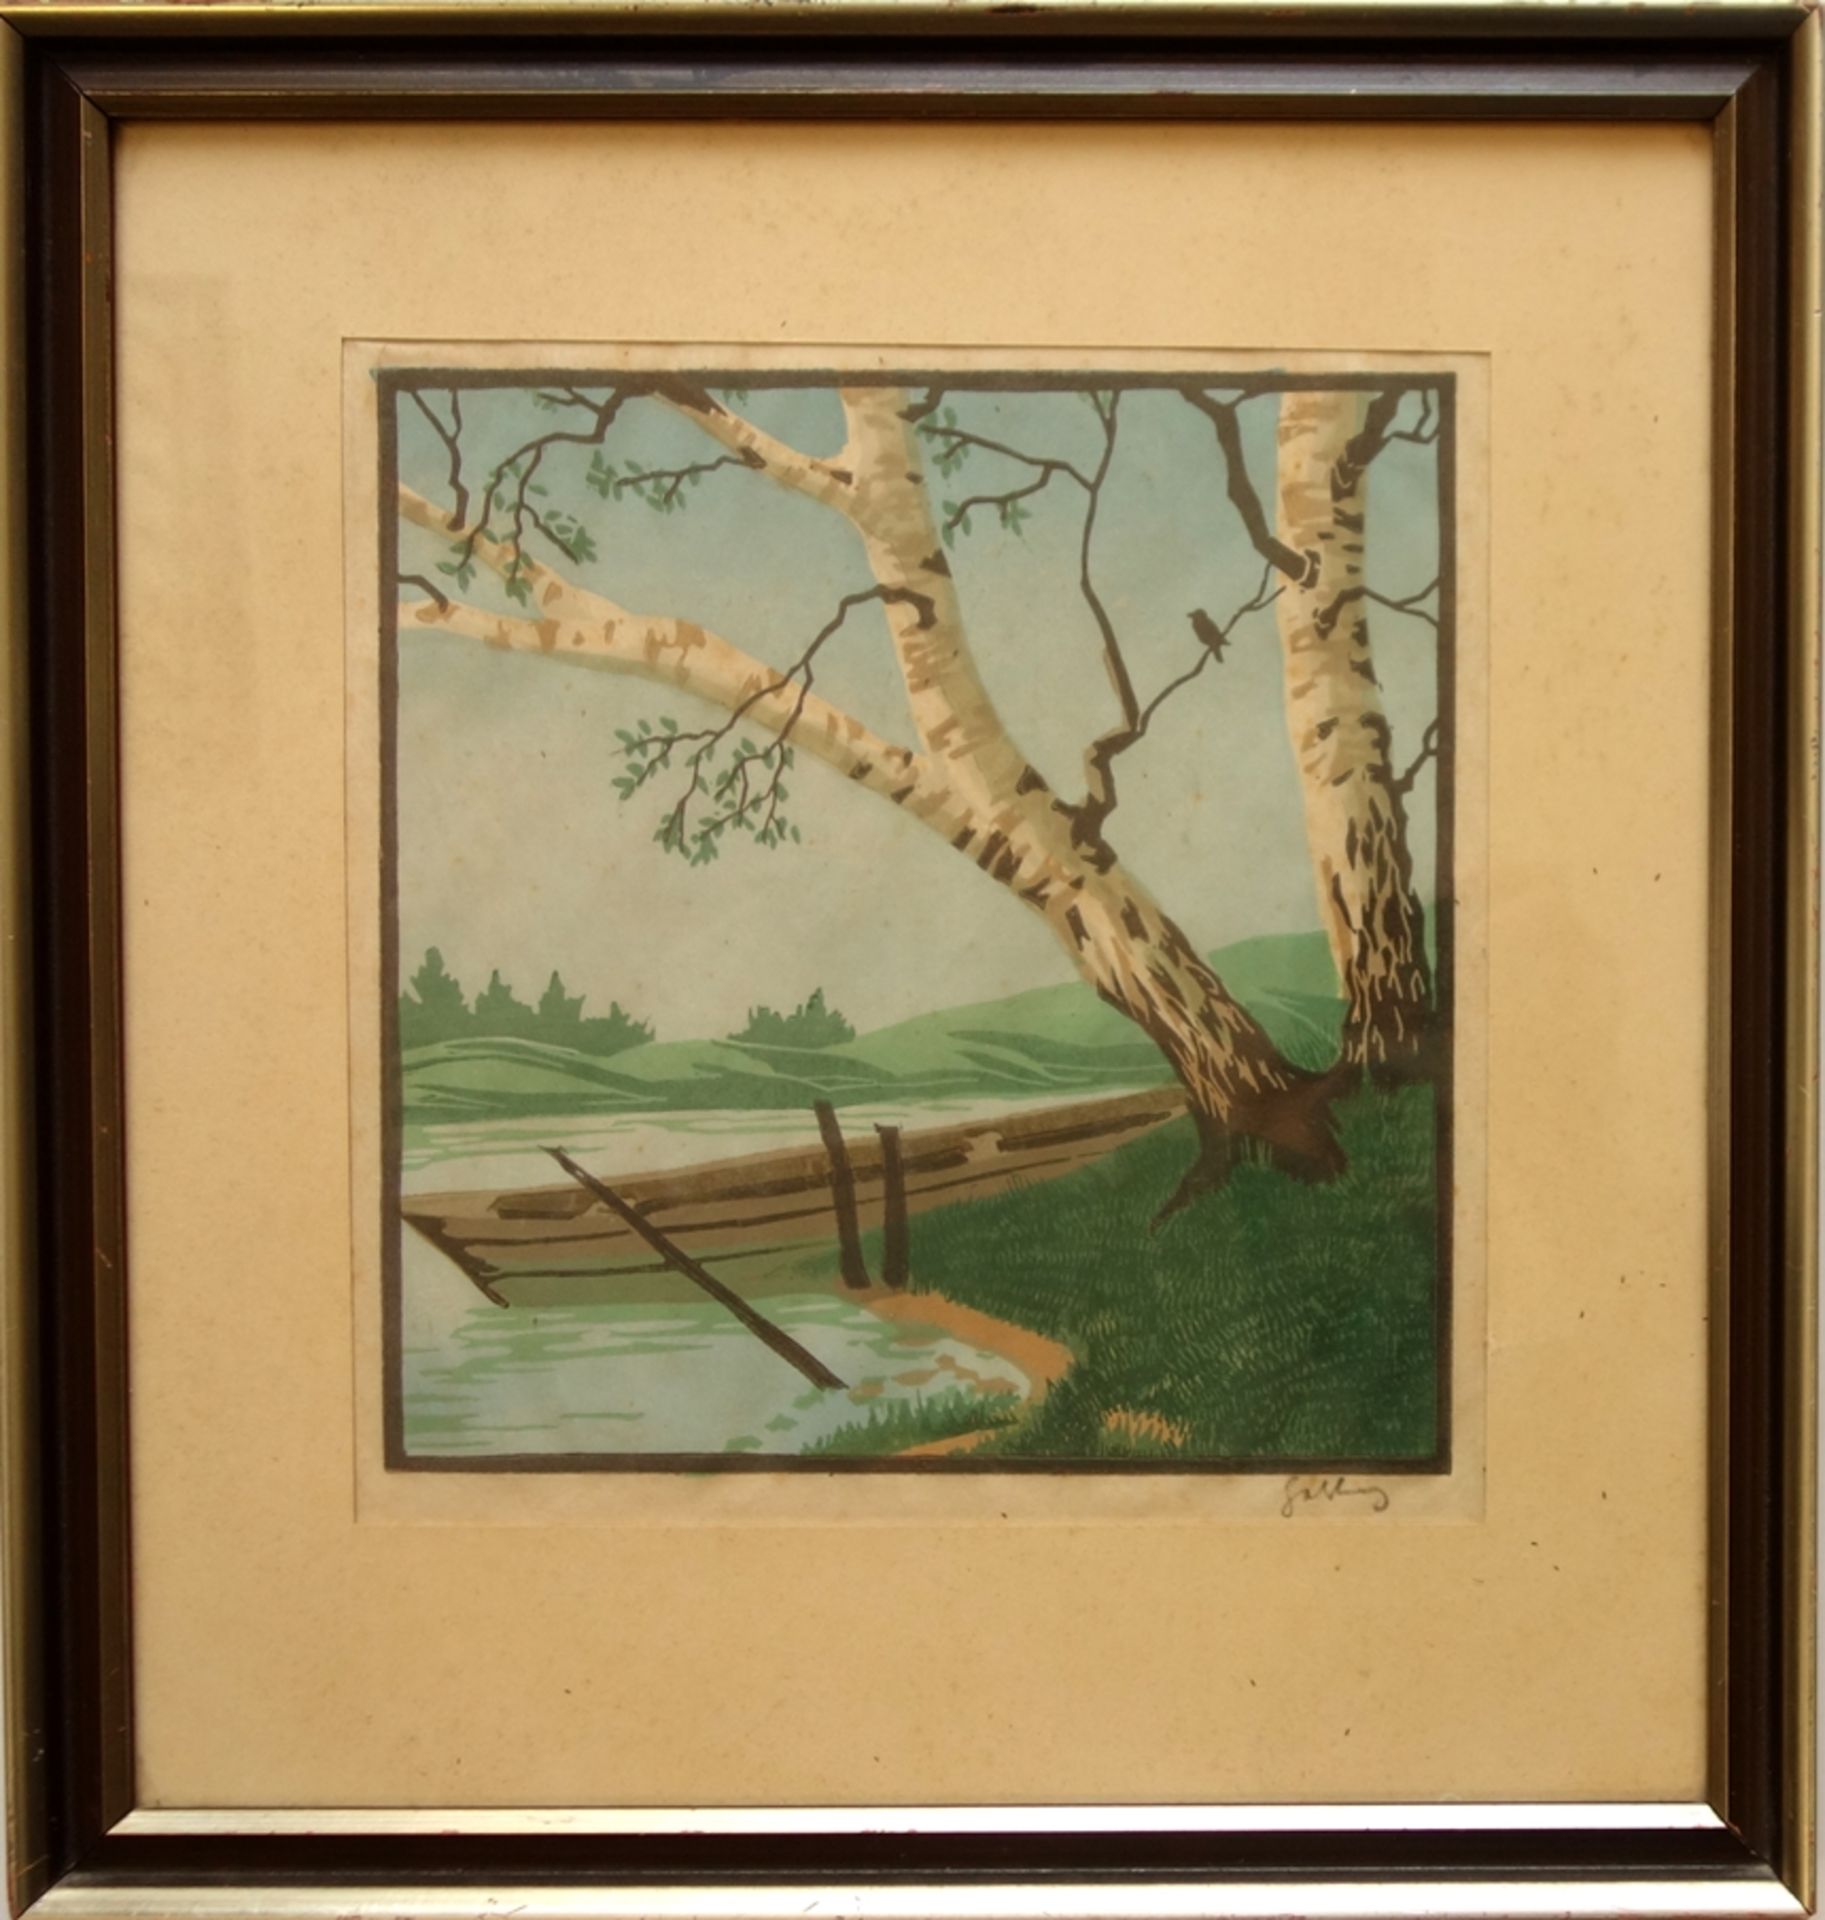 illegibly signed, "Birches on the jetty", 1930s, colour linocut